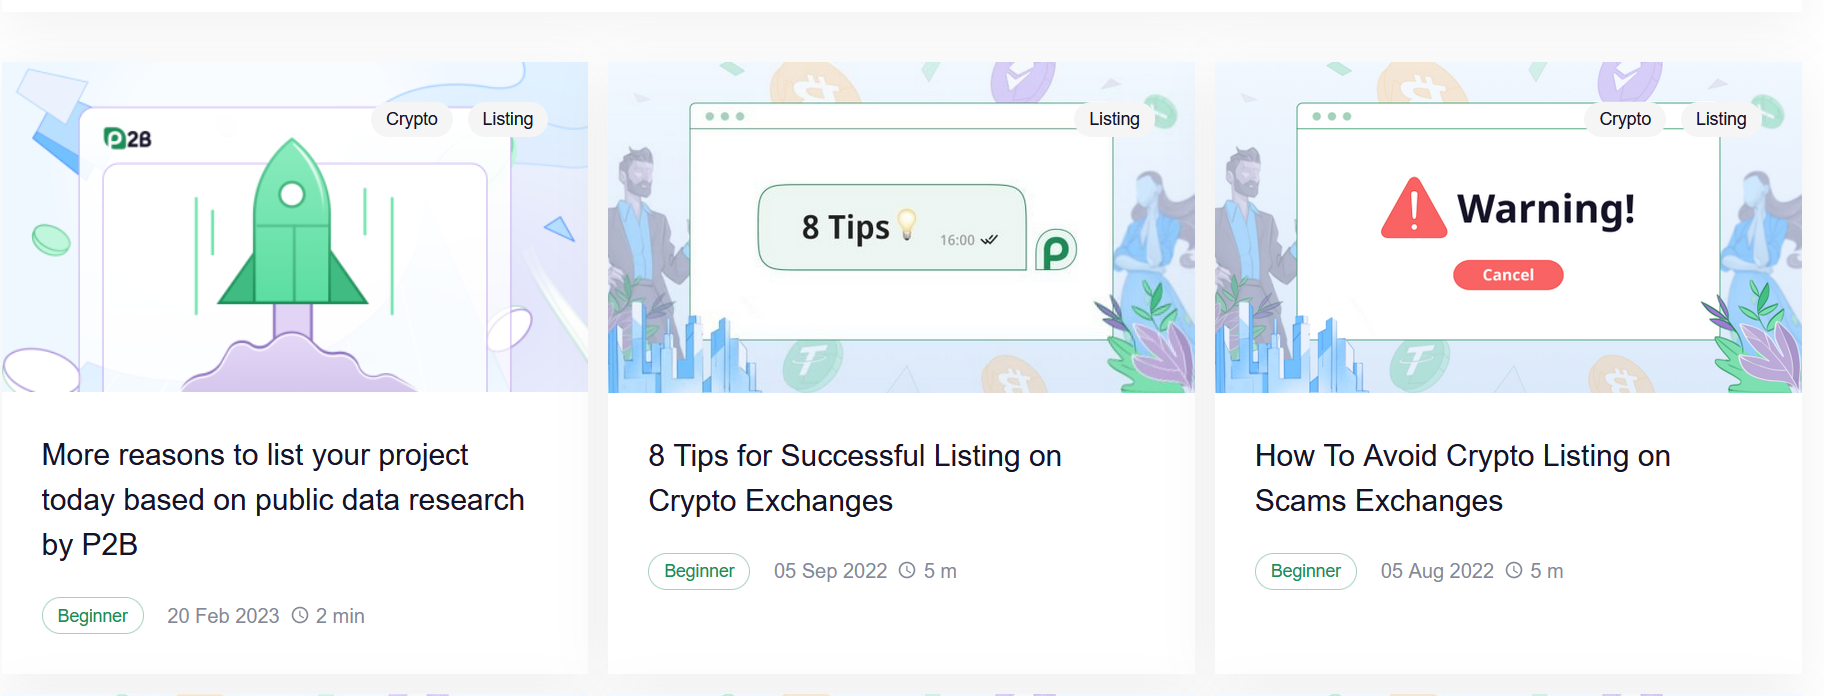 Listing overview